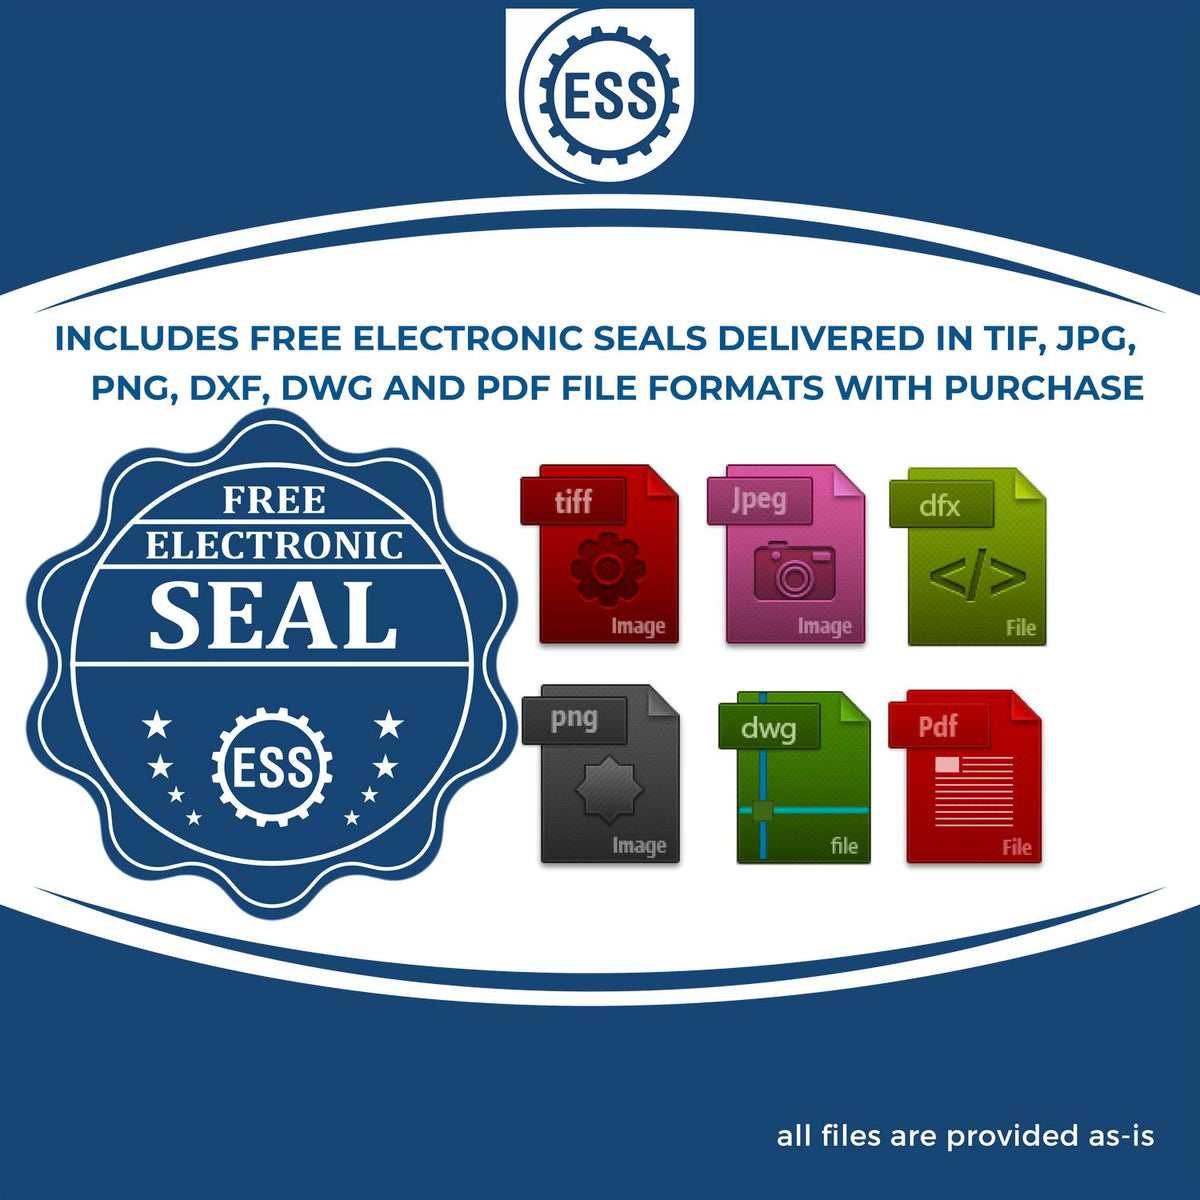 An infographic for the free electronic seal for the Long Reach Vermont Geology Seal illustrating the different file type icons such as DXF, DWG, TIF, JPG and PNG.